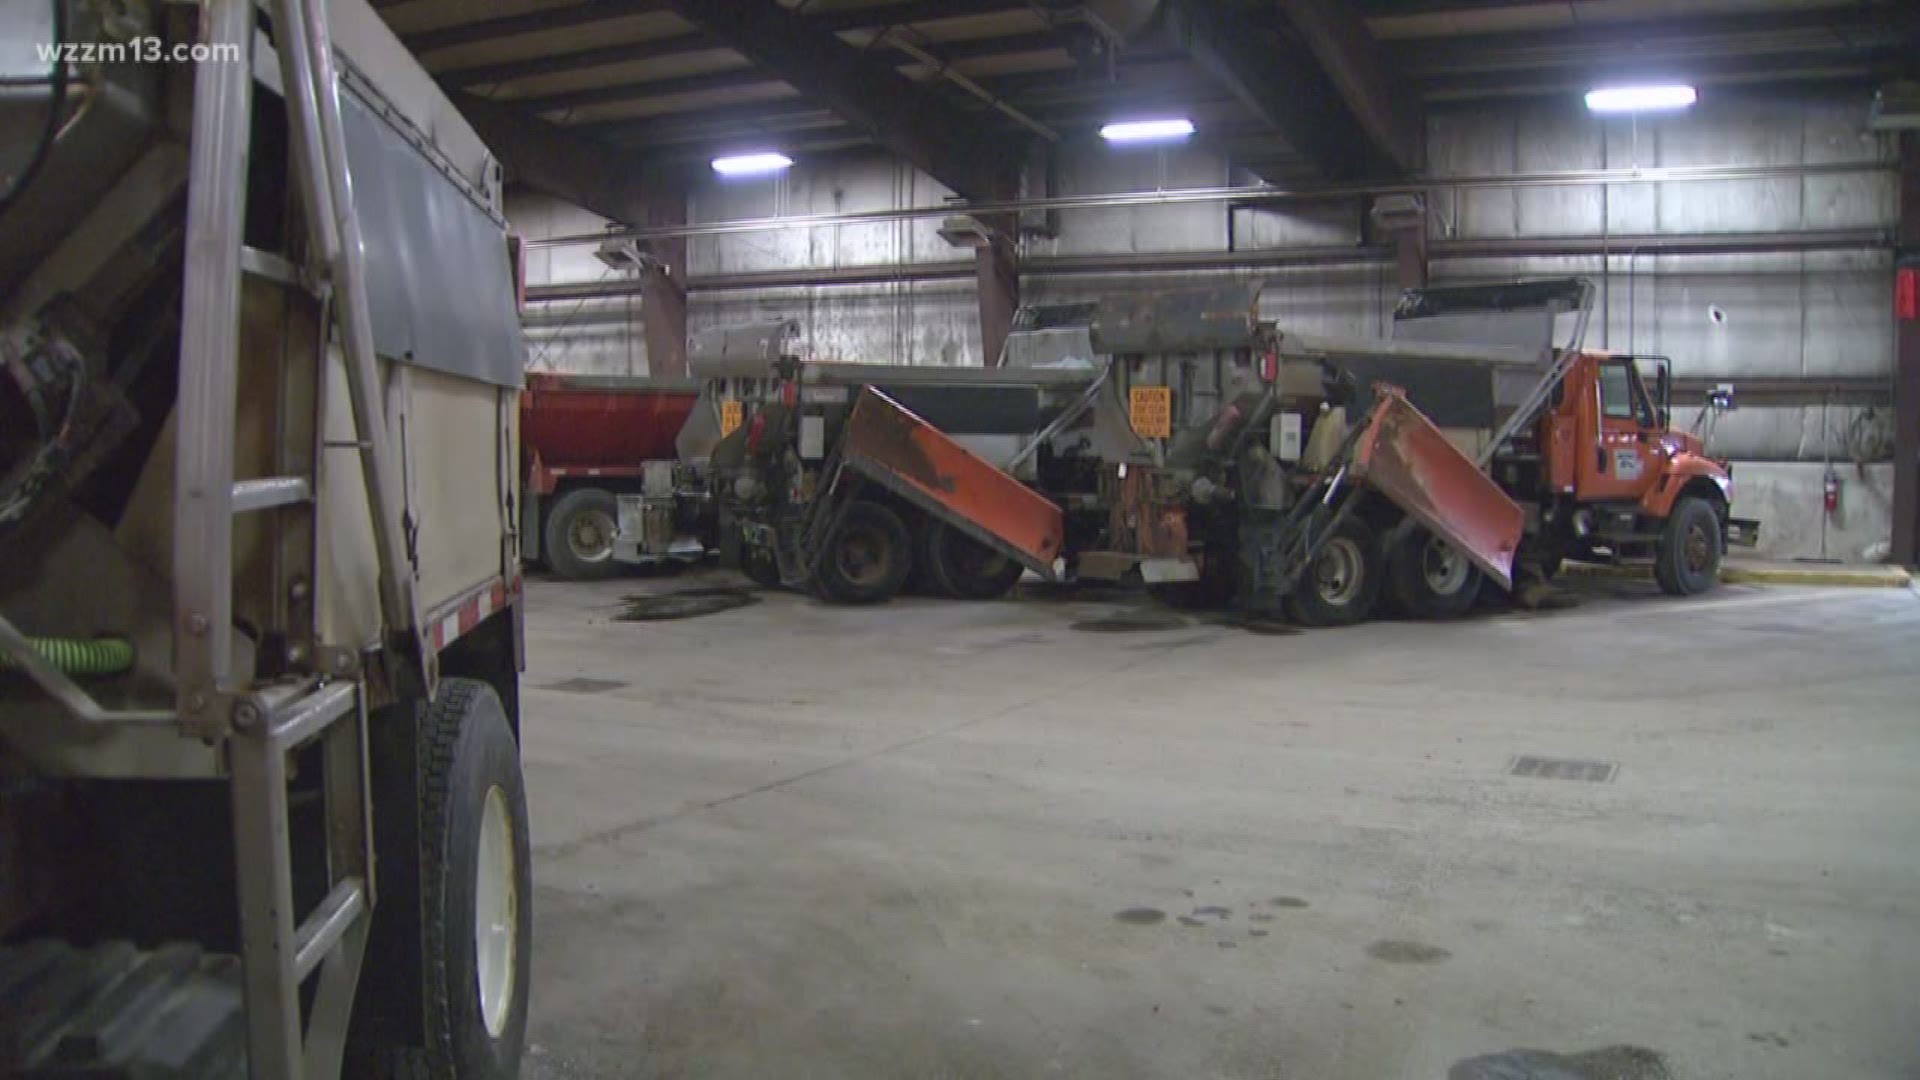 Road commissions prepare for Ice storm